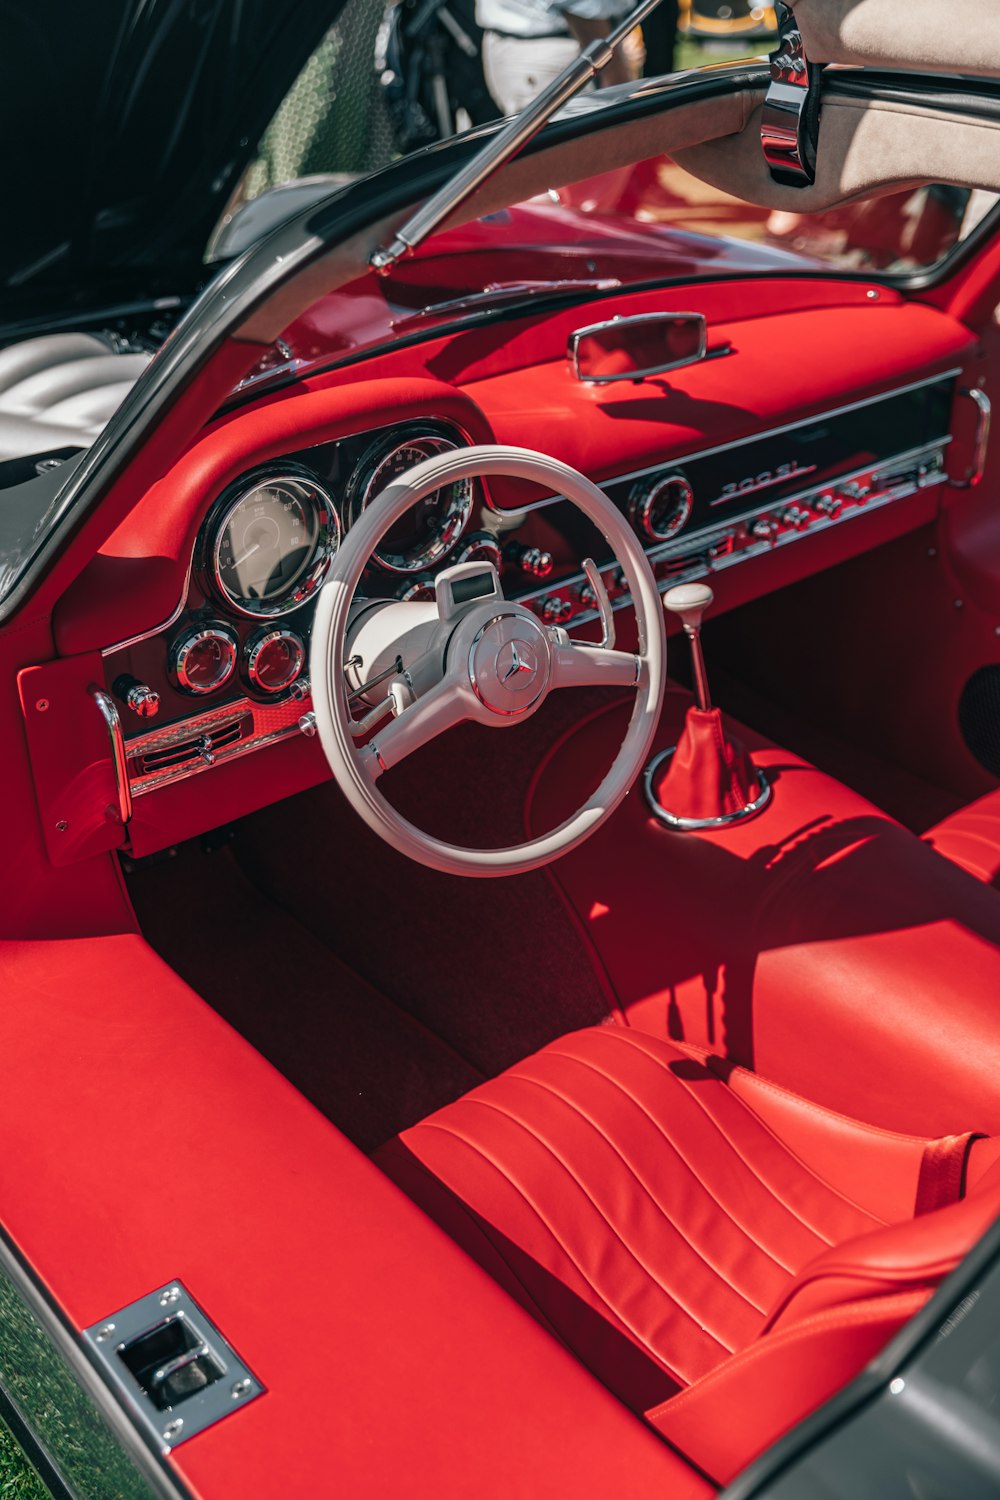 Black Red And White Interior Of A Sports Car Photo Free